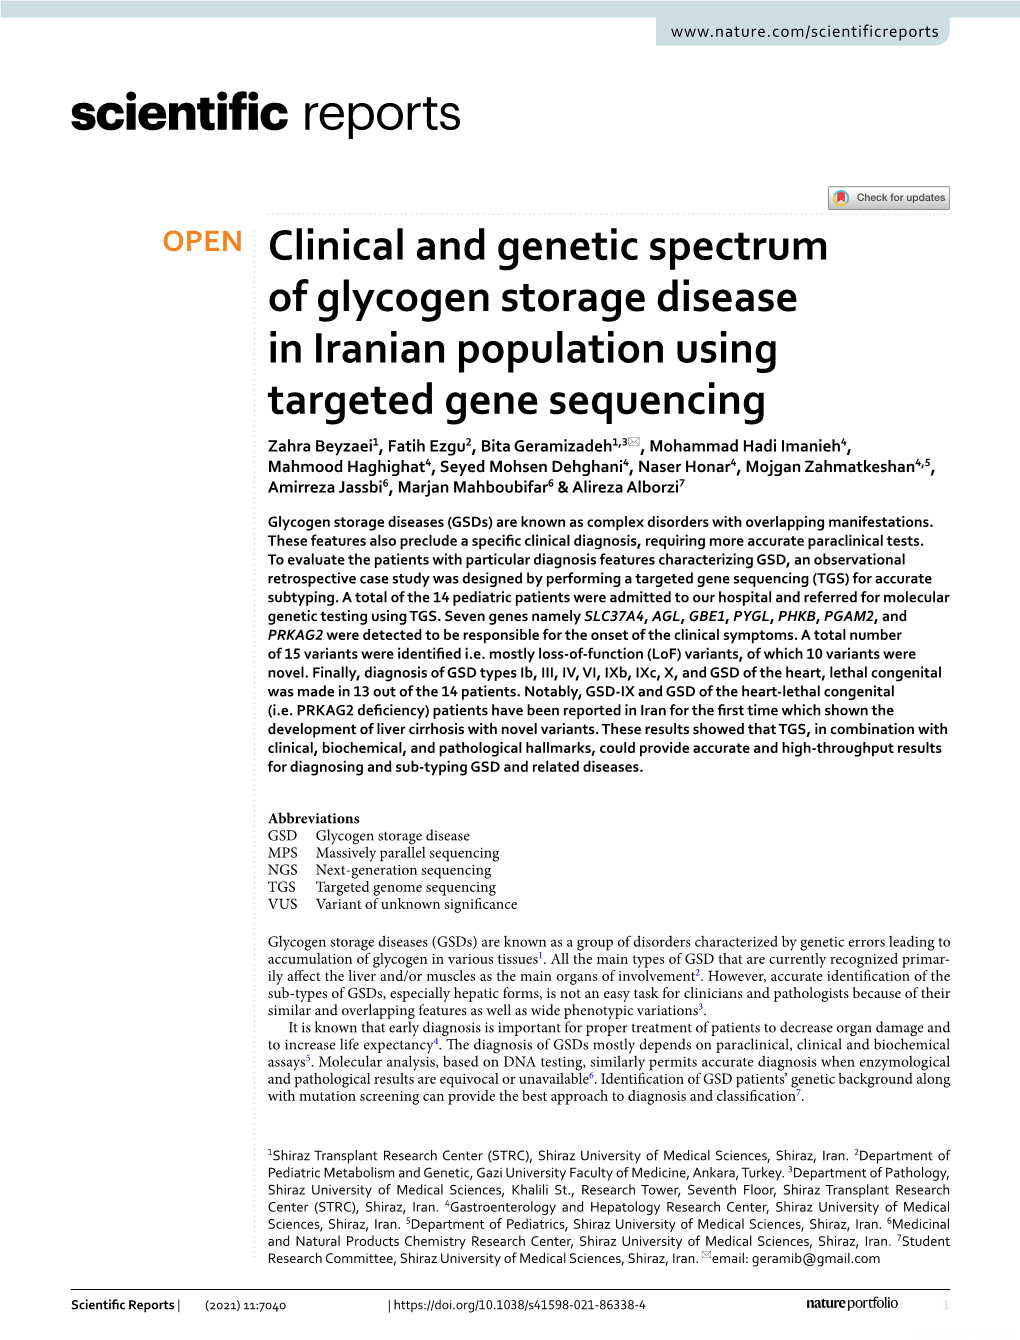 Clinical and Genetic Spectrum of Glycogen Storage Disease in Iranian